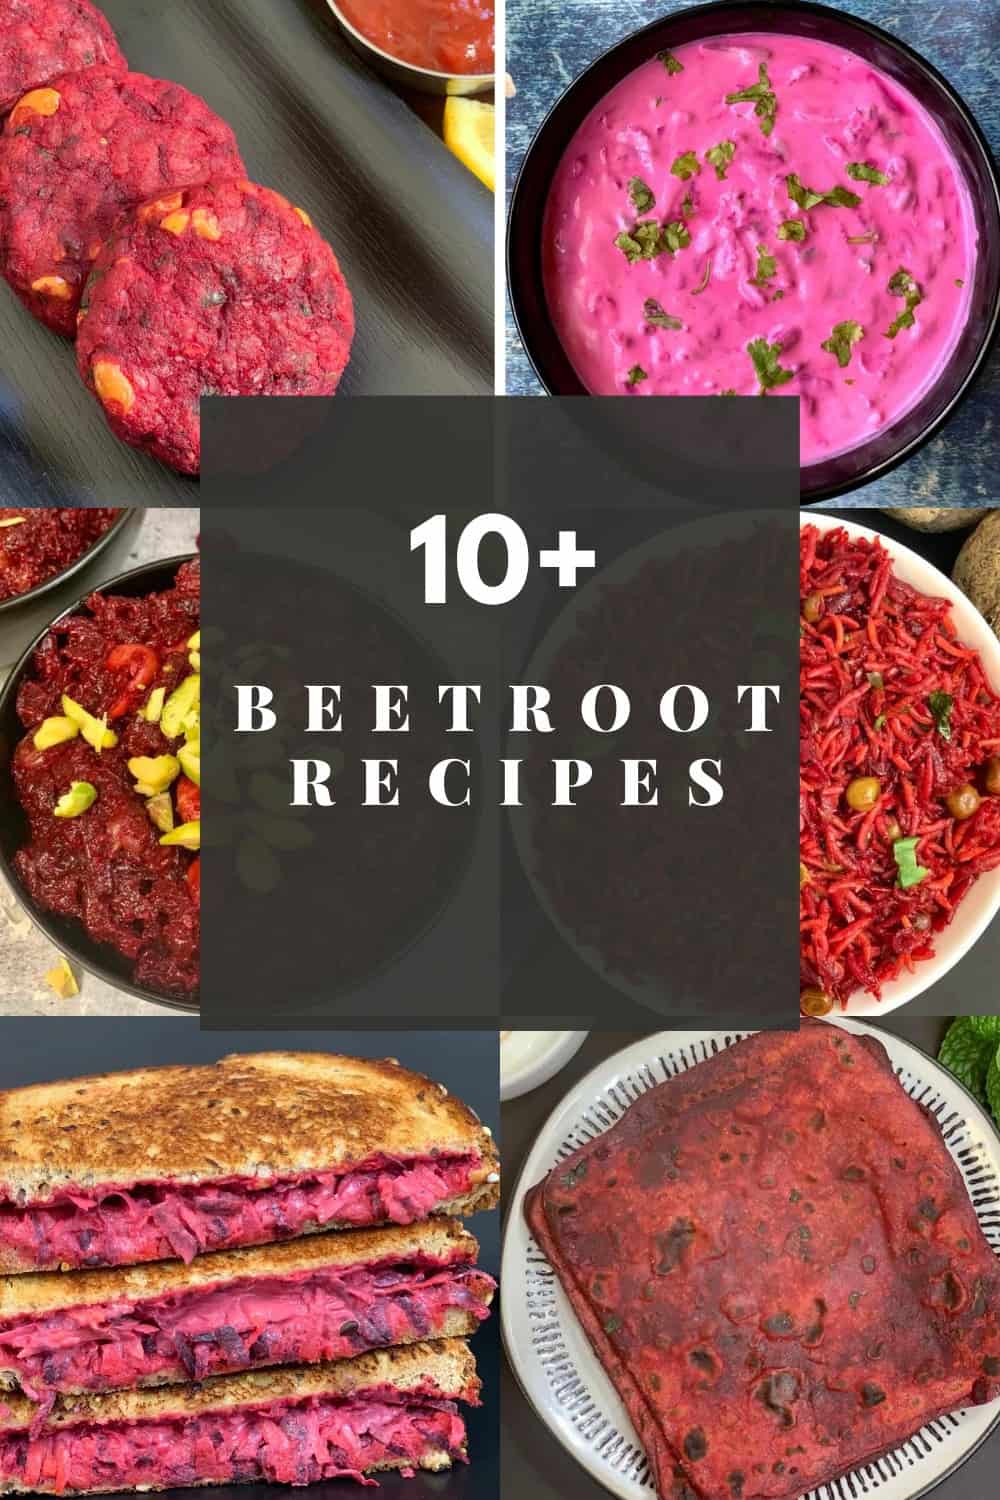 Indian Beetroot Recipes collage